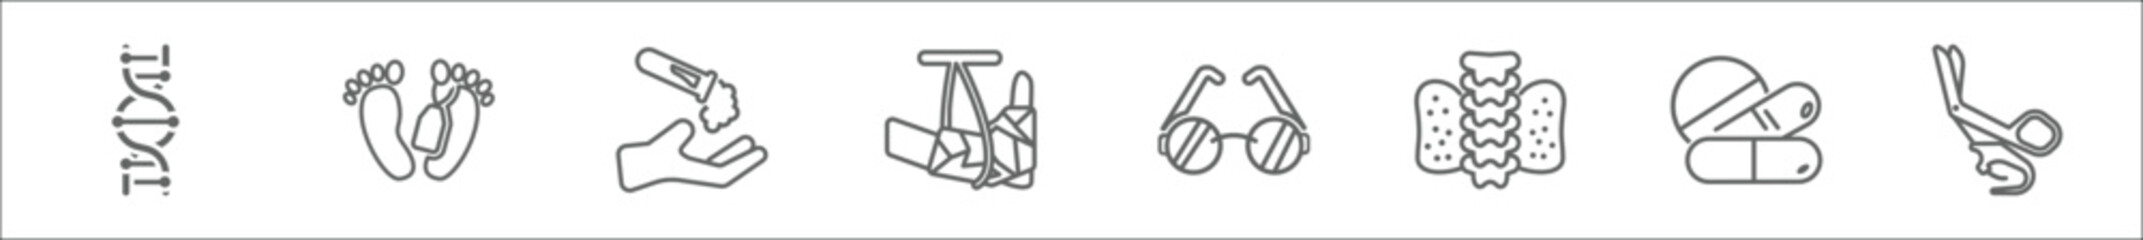 outline set of medical line icons. linear vector icons such as medical chain of dna, dead, acid falling on hand, broken feet with bandage, medical circular glasses, thyroid gland, cure, opened